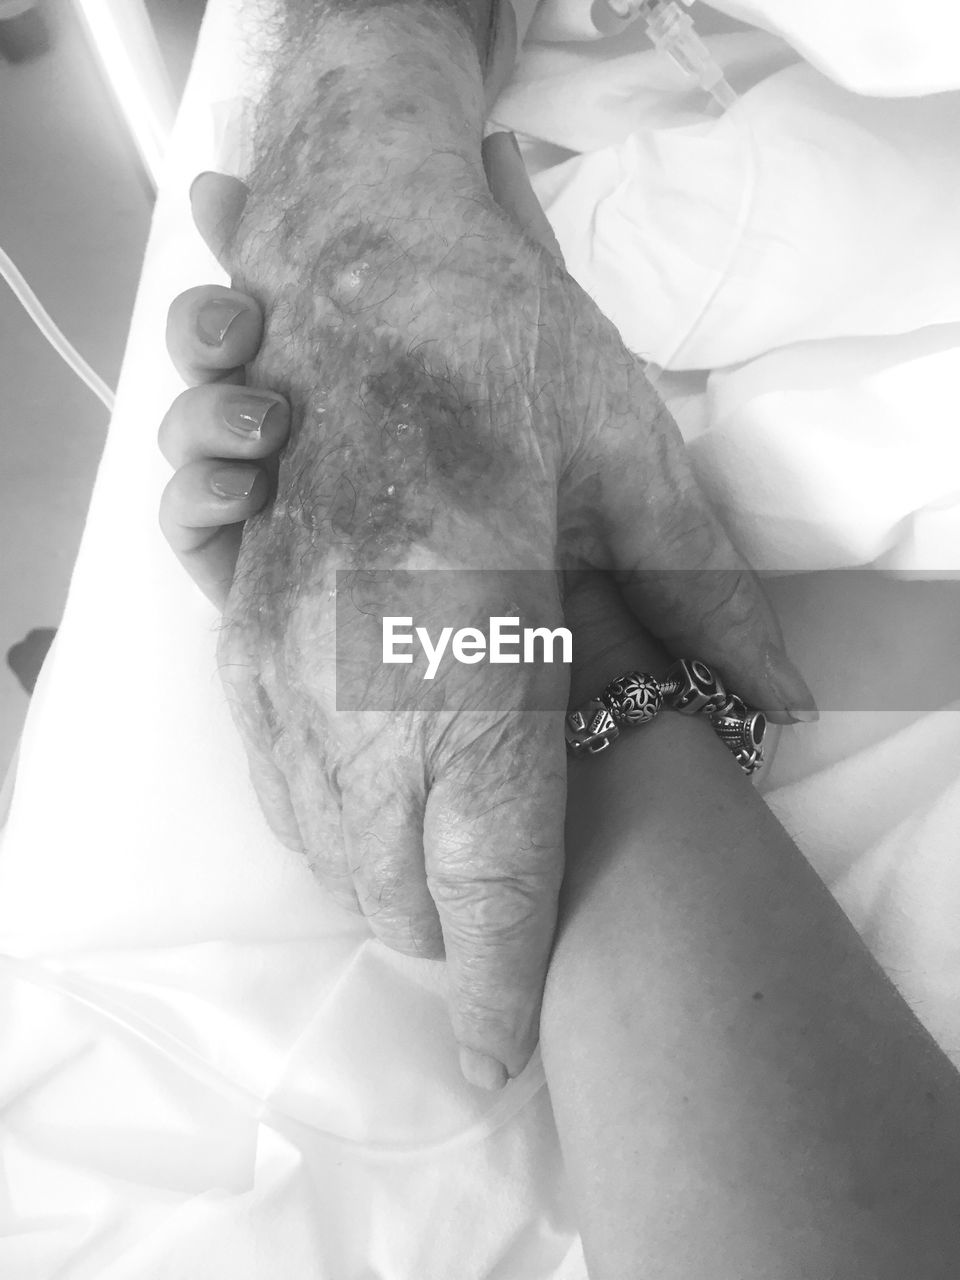 Cropped hand of woman holding patient in hospital